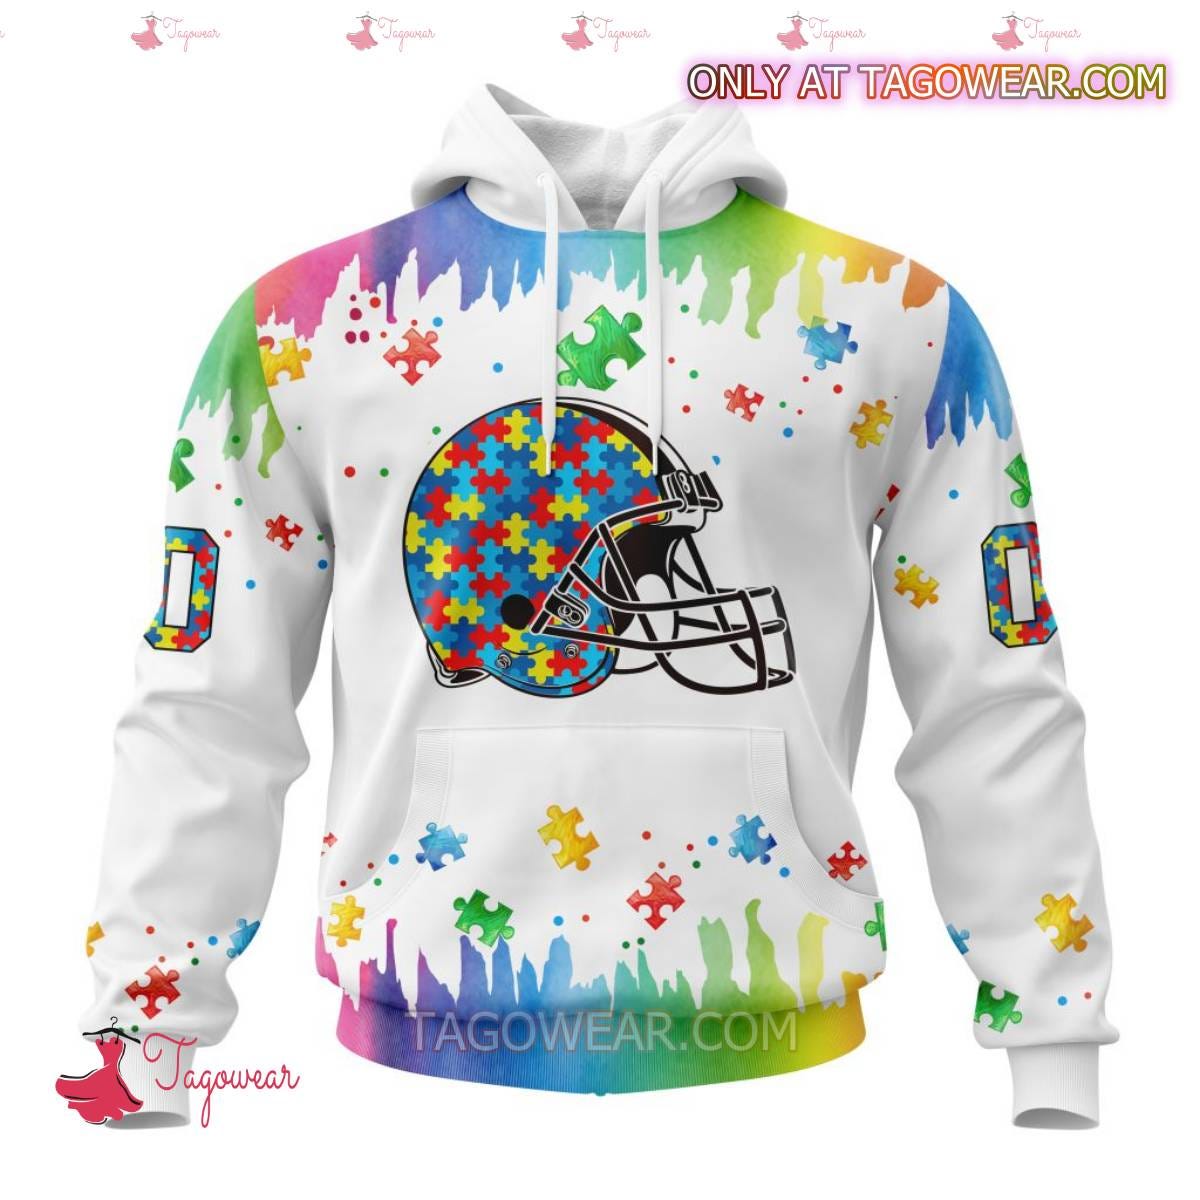 Support for Autism Awareness and the Cleveland Browns with Personalized T- Shirt and Hoodie!, by Tagowear shirt